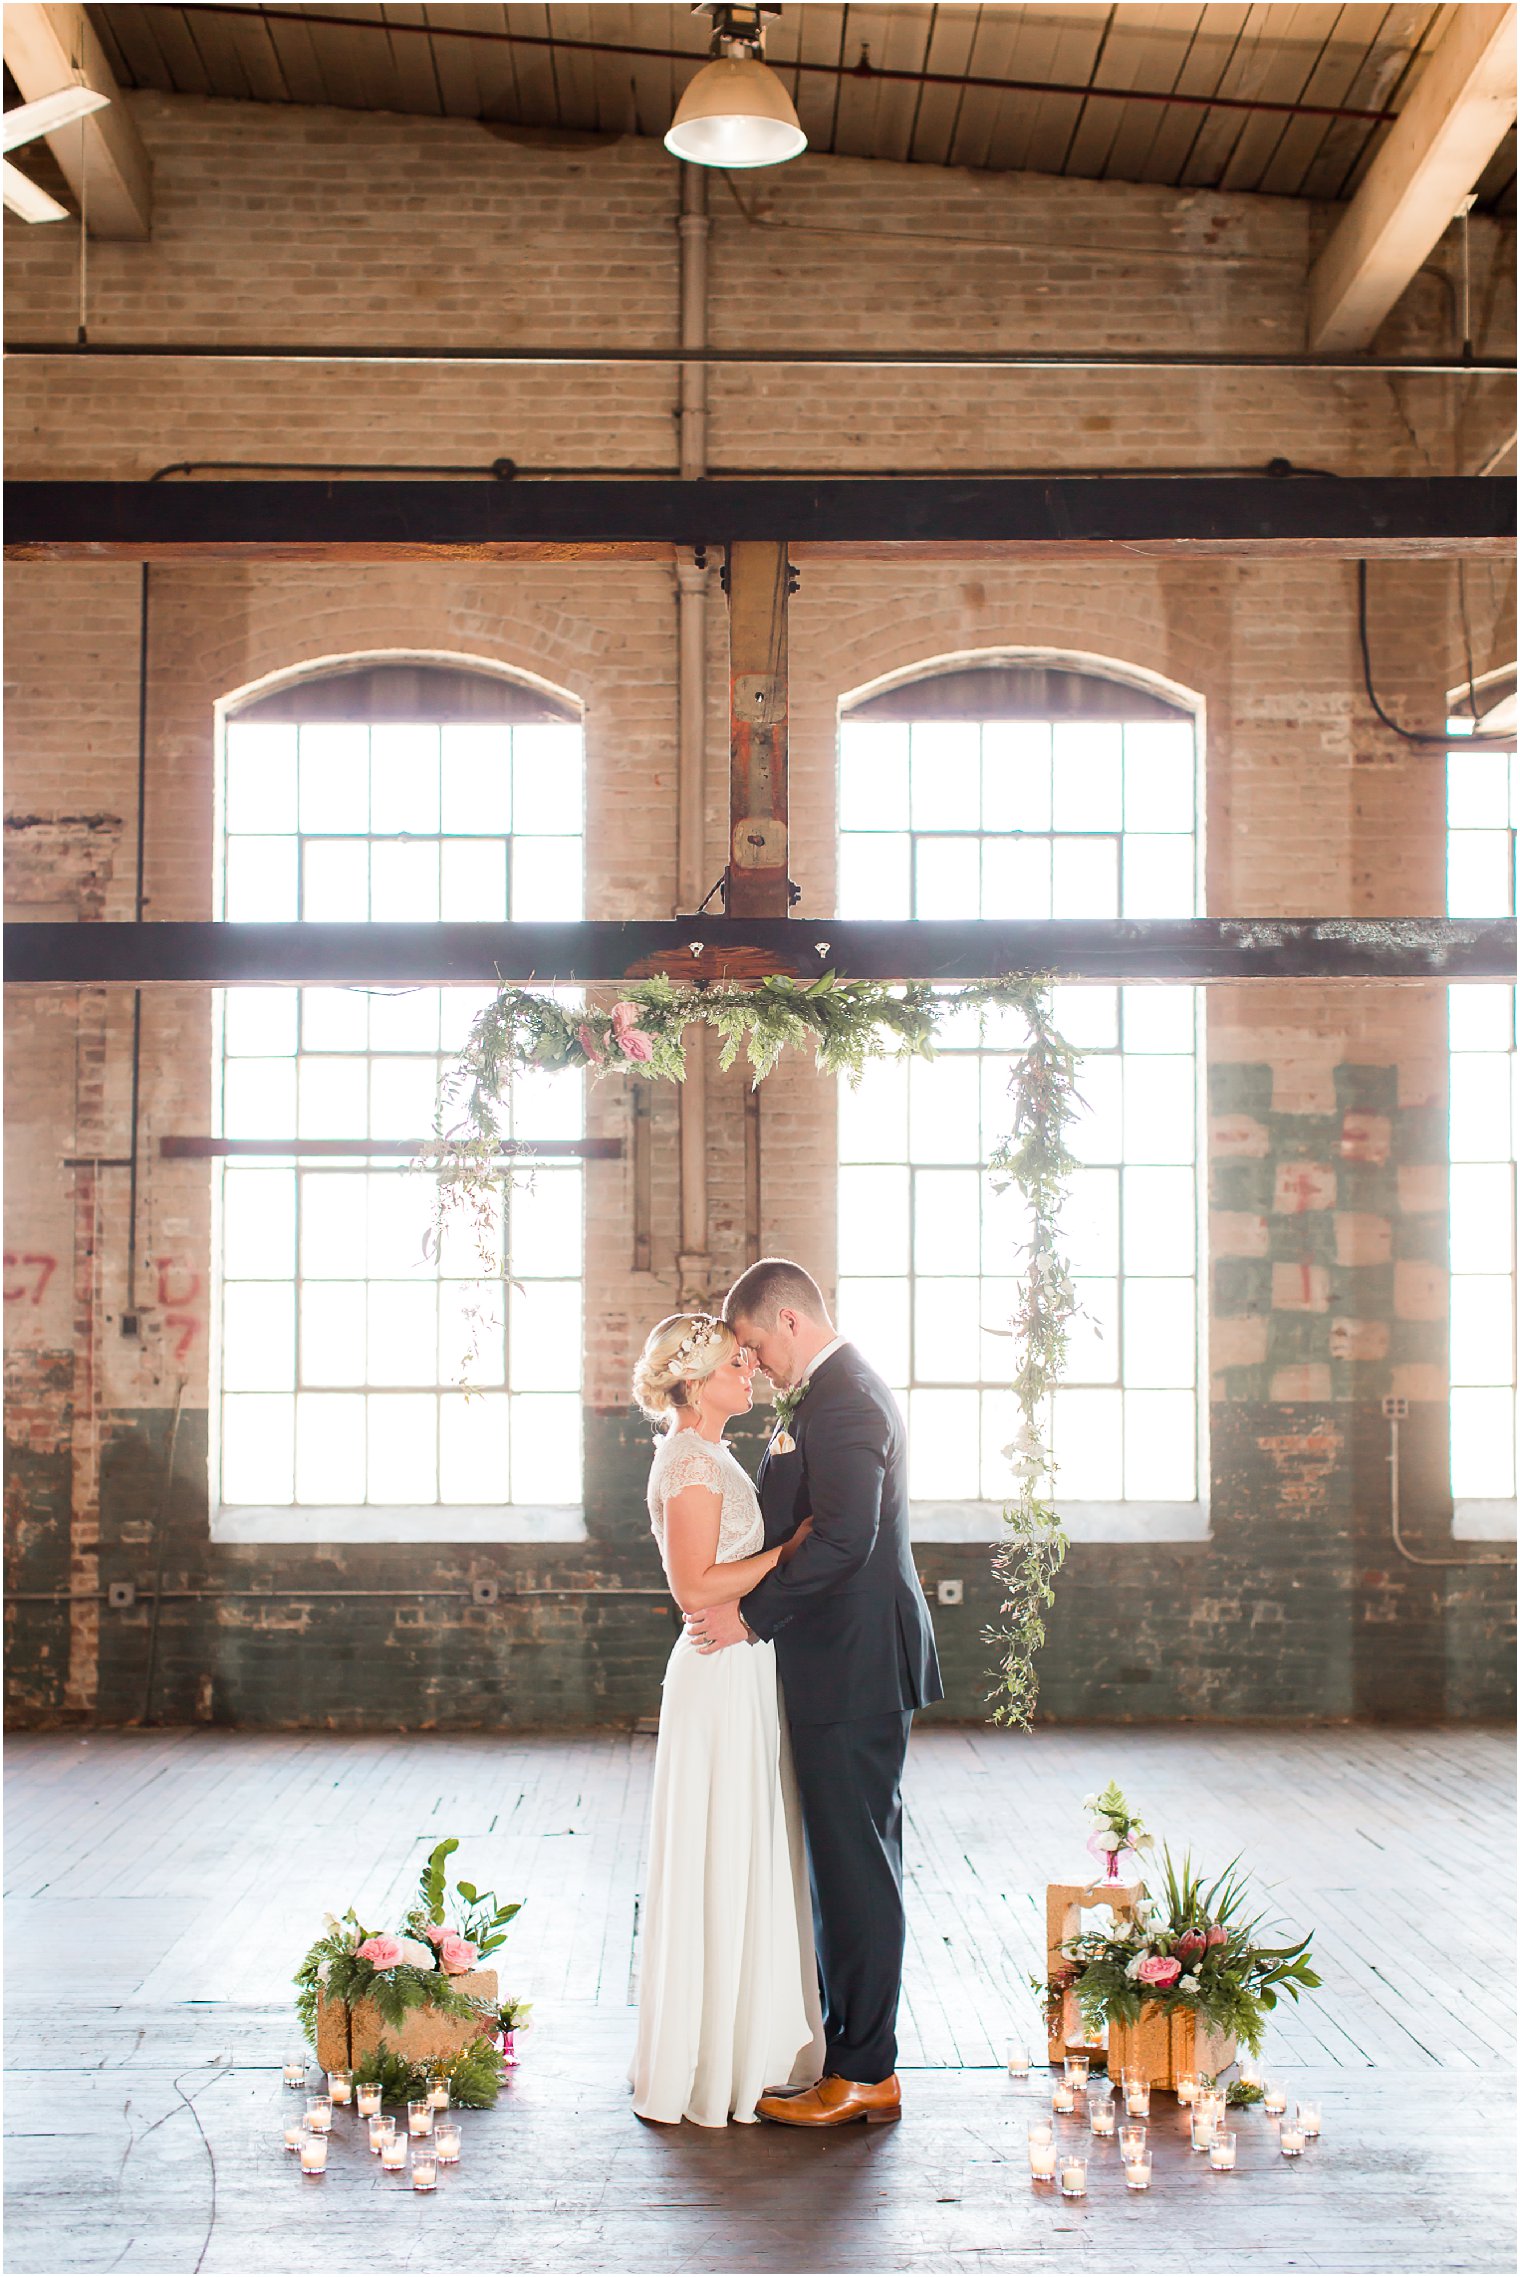 Wedding ceremony with industrial chic style